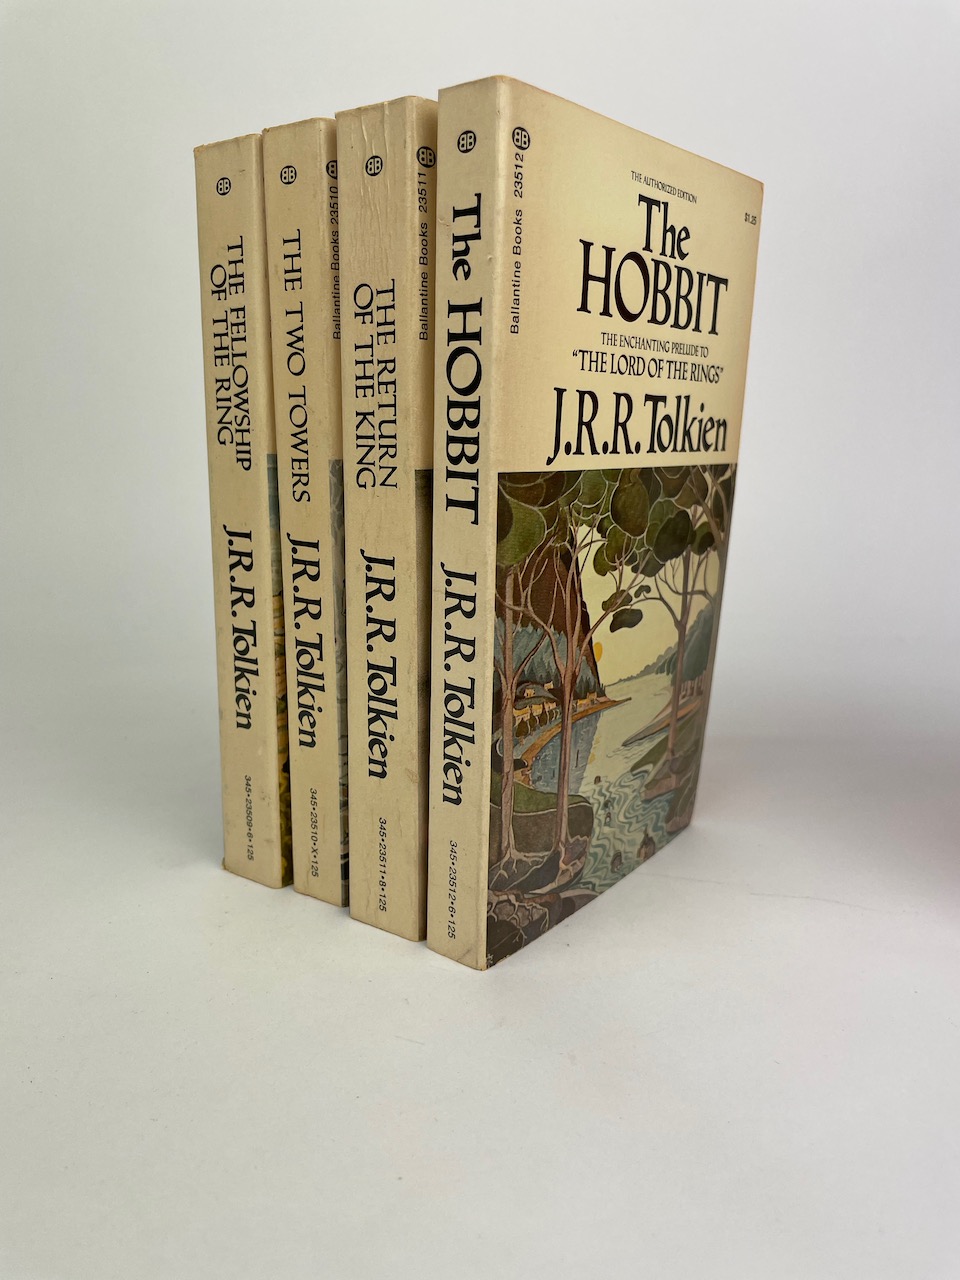 The Hobbit and The Lord of the Rings, Four Paperback Book Boxset from 1973, Red Slipcase 8